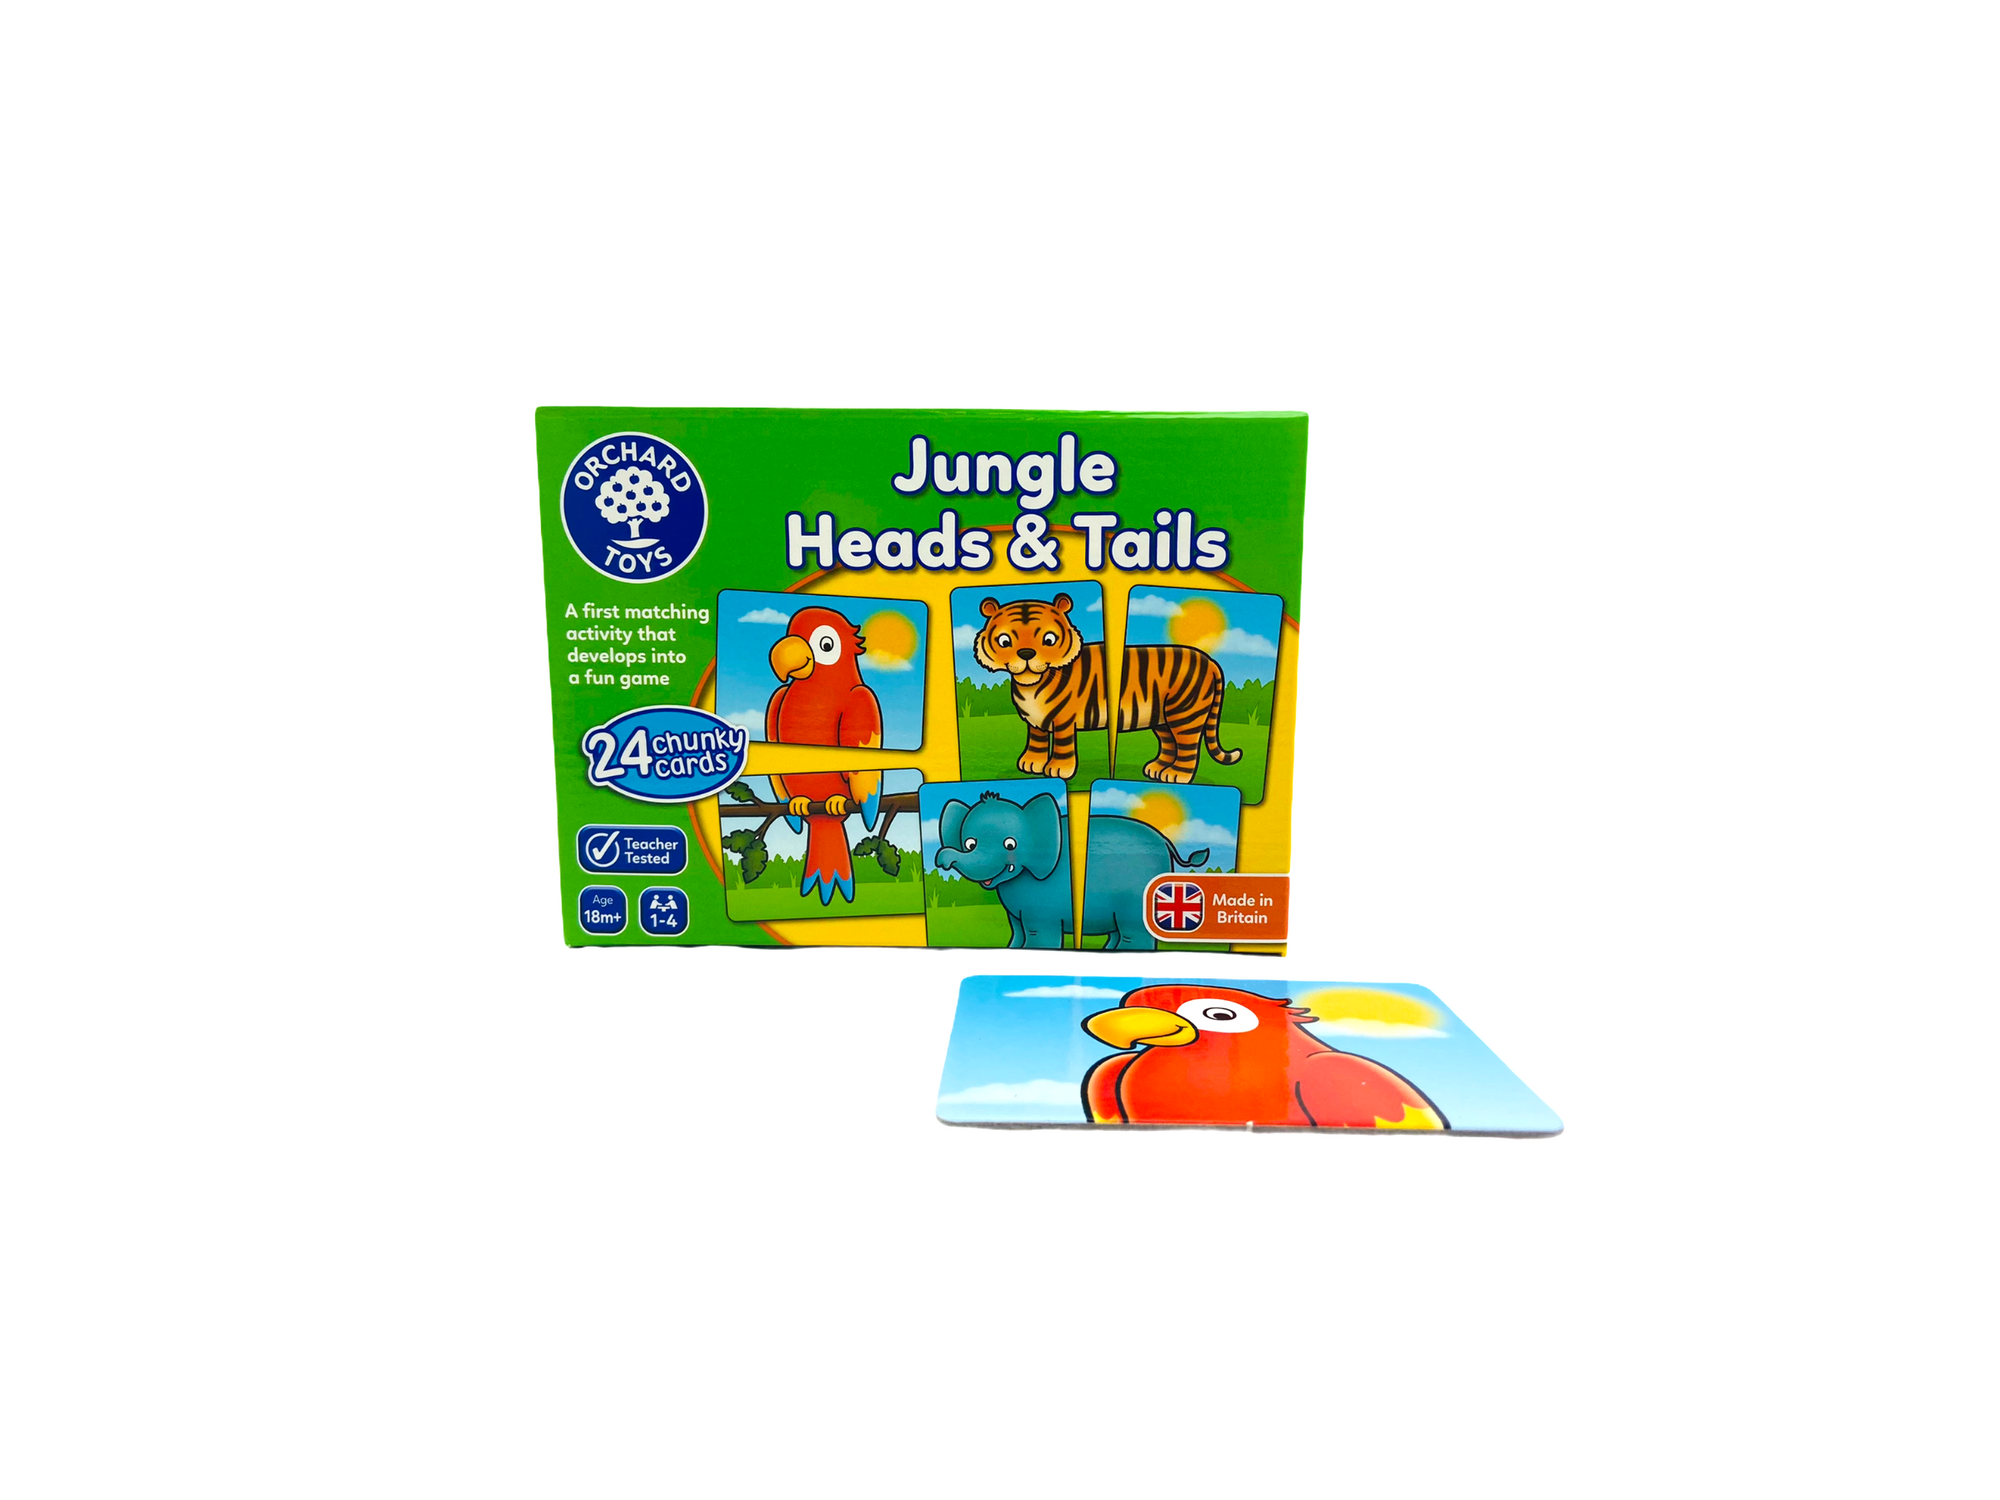 Orchard Toys Jungle heads & Tails